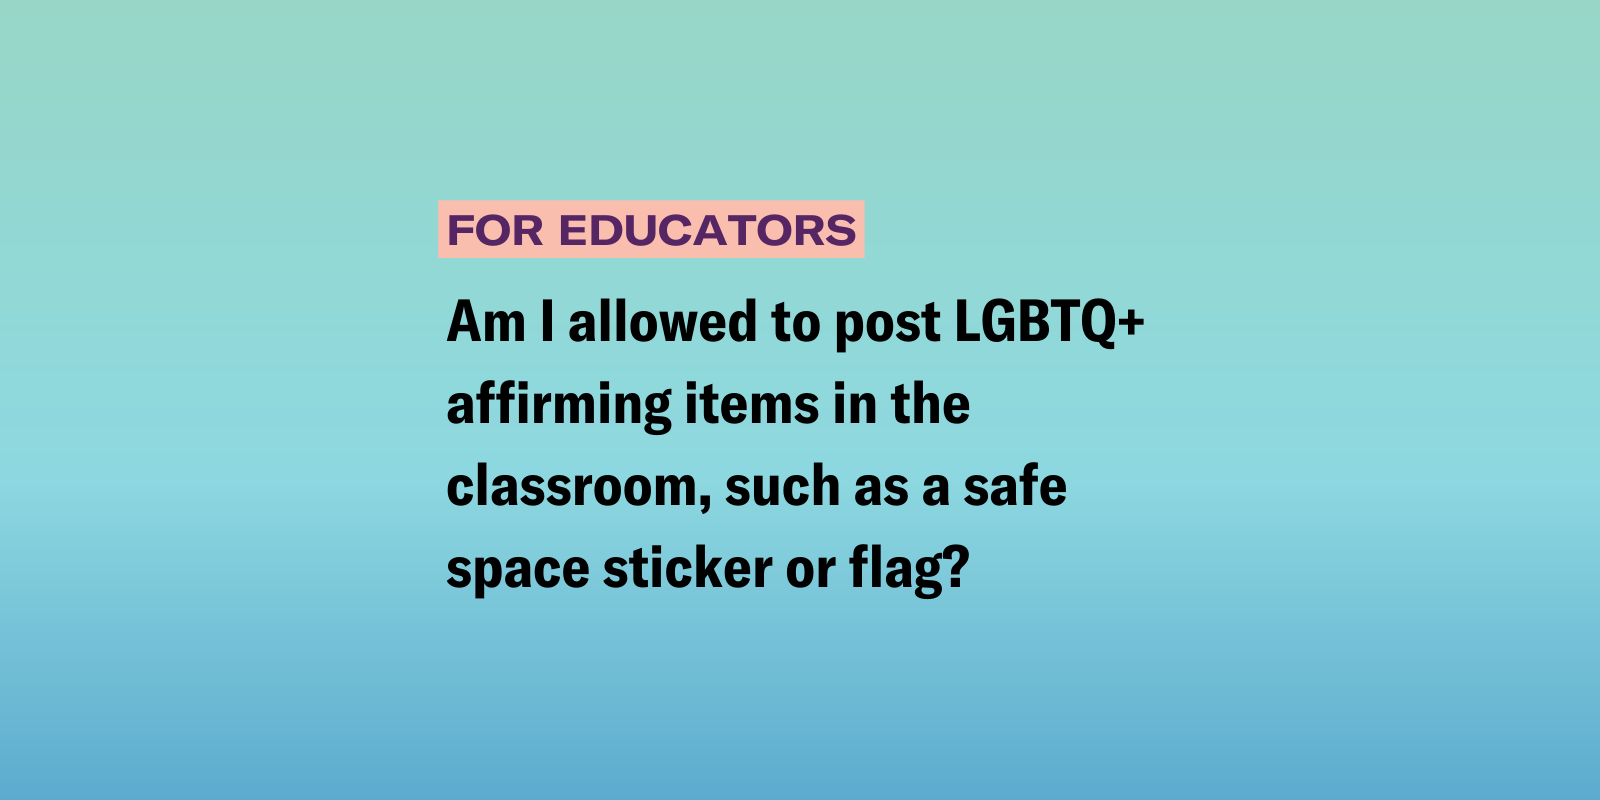 Am I allowed to post LGBTQ+ affirming items in the classroom, such as a safe space sticker or flag? 